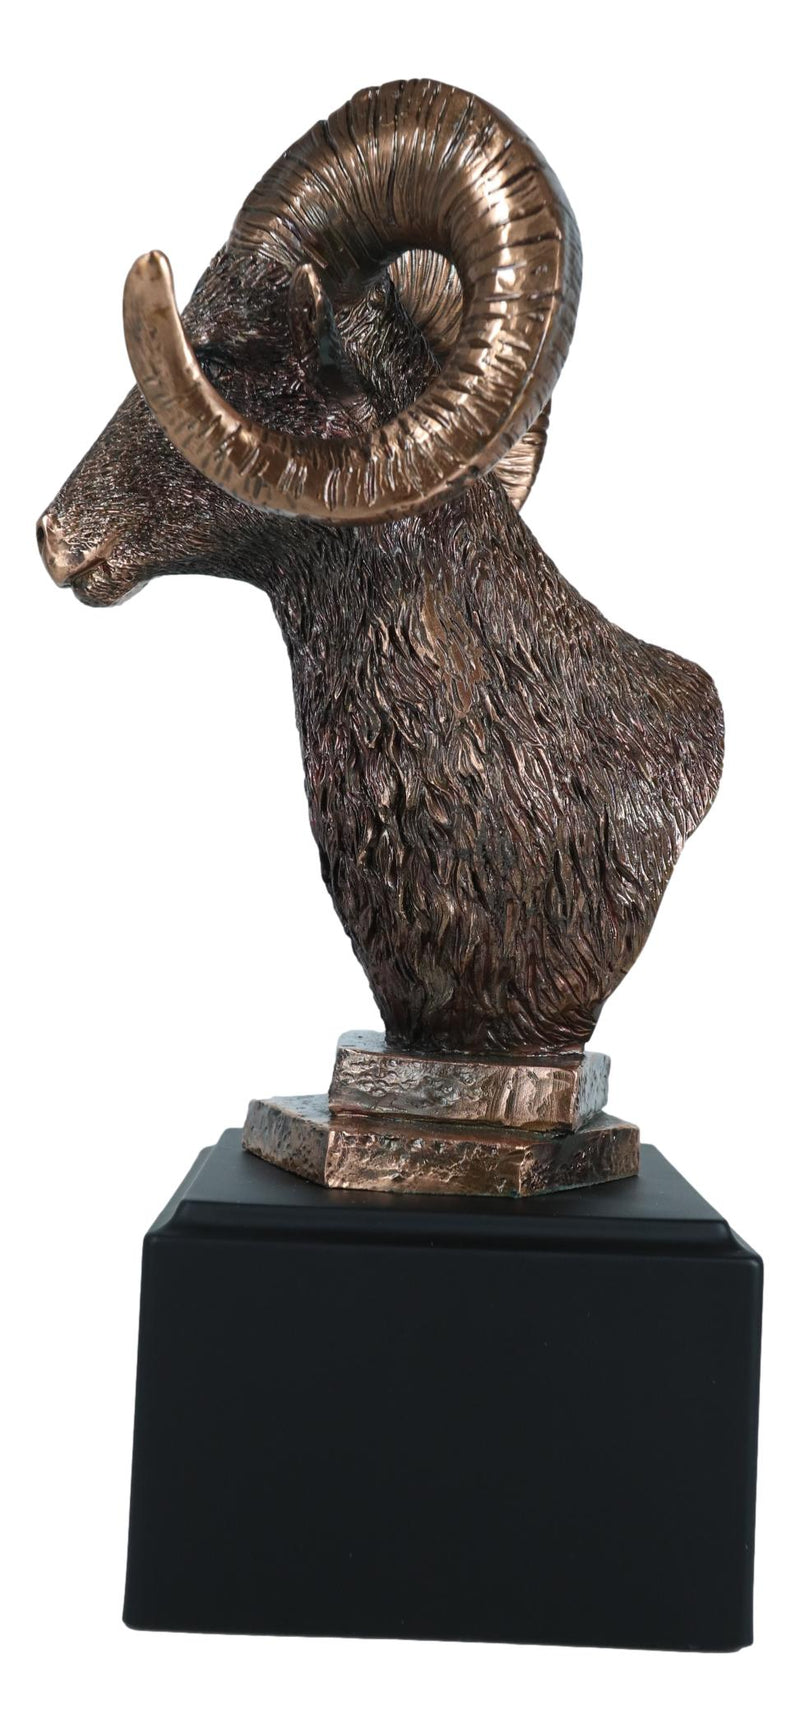 Rustic Country Wildlife Bighorn Sheep Ram Bust Sculpture with Trophy Base 8"H